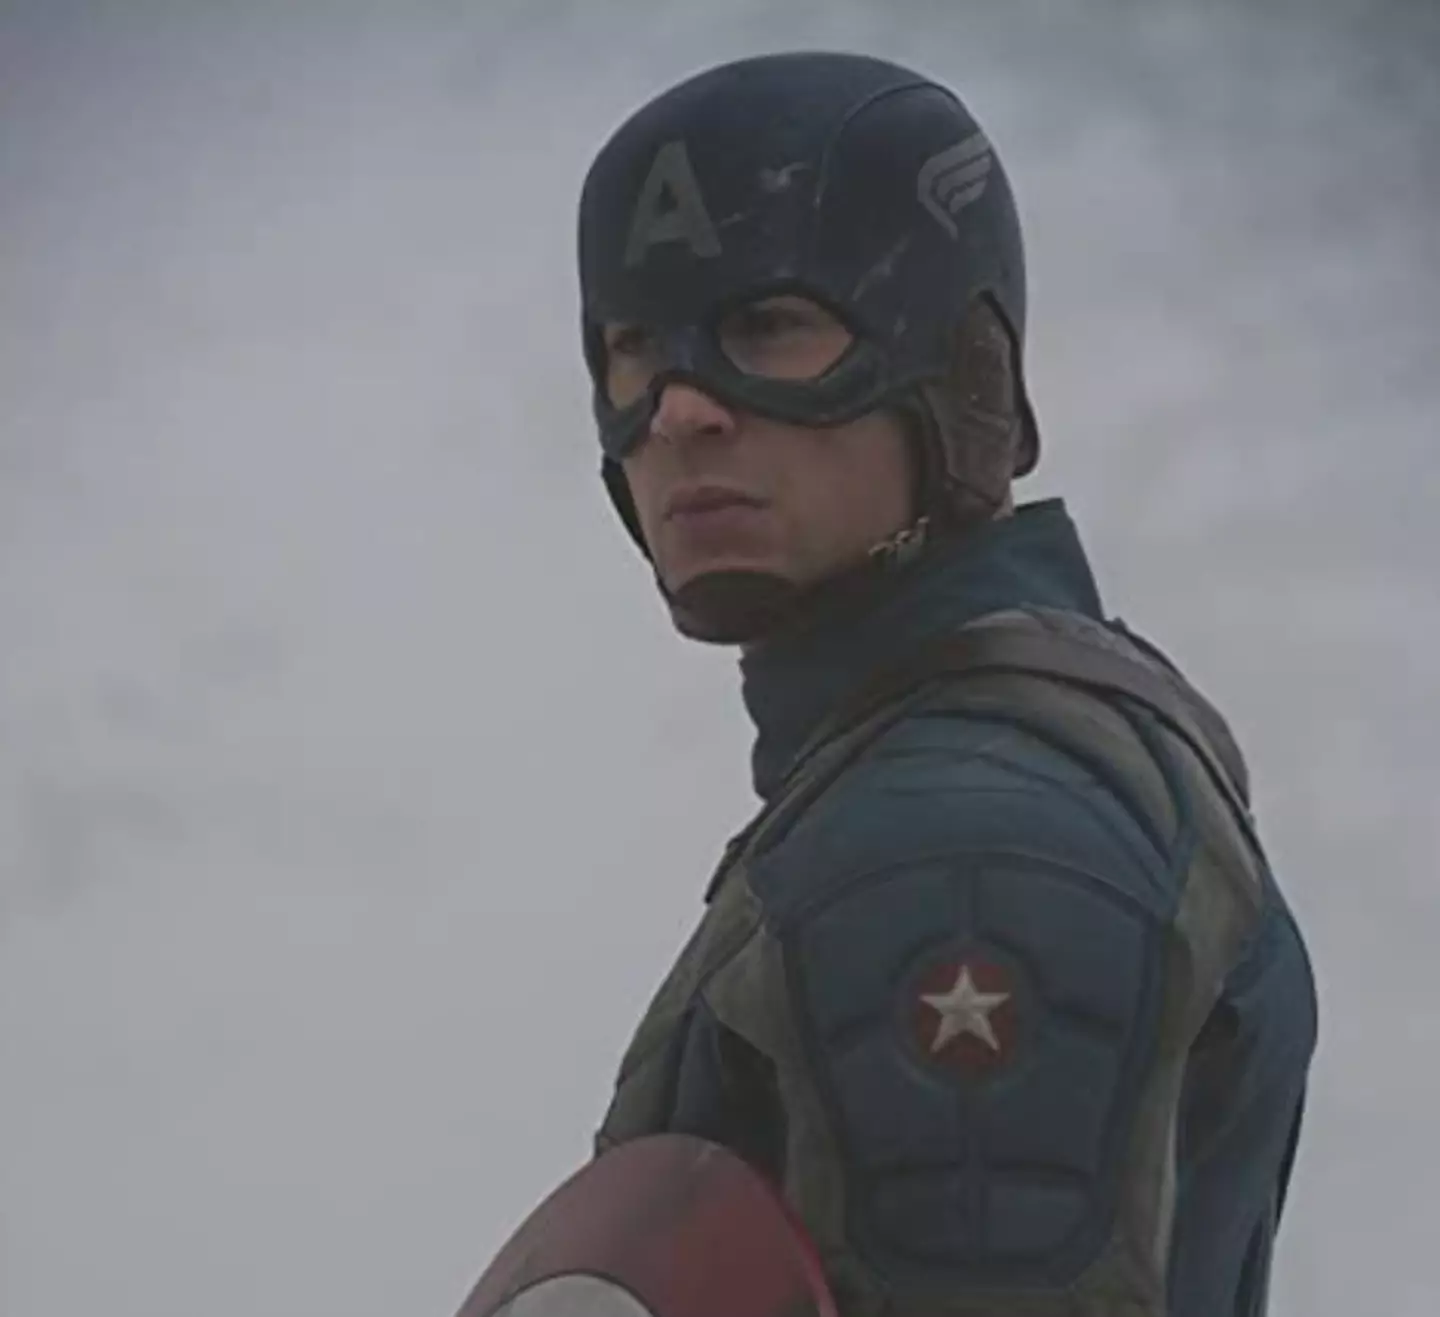 The First Avenger introduced Chris Evans' Captain America.